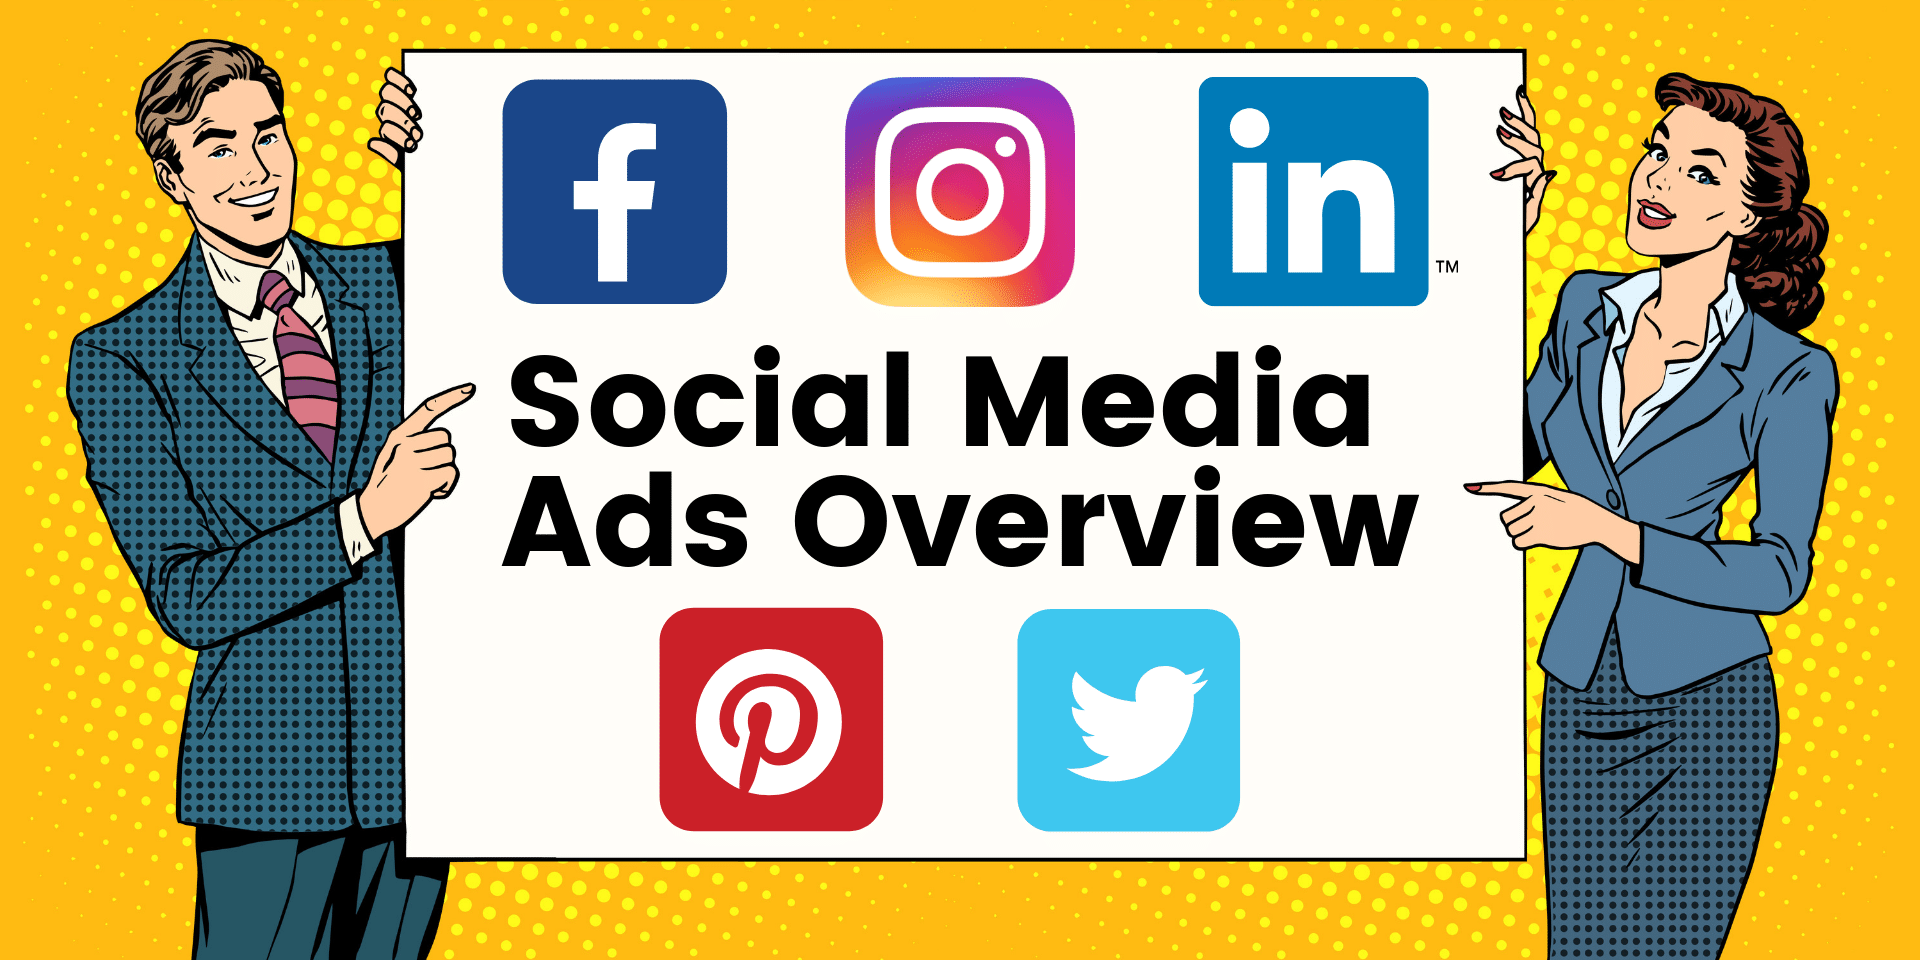 Social Media Ads: Basics You Need to Know About Each Platform